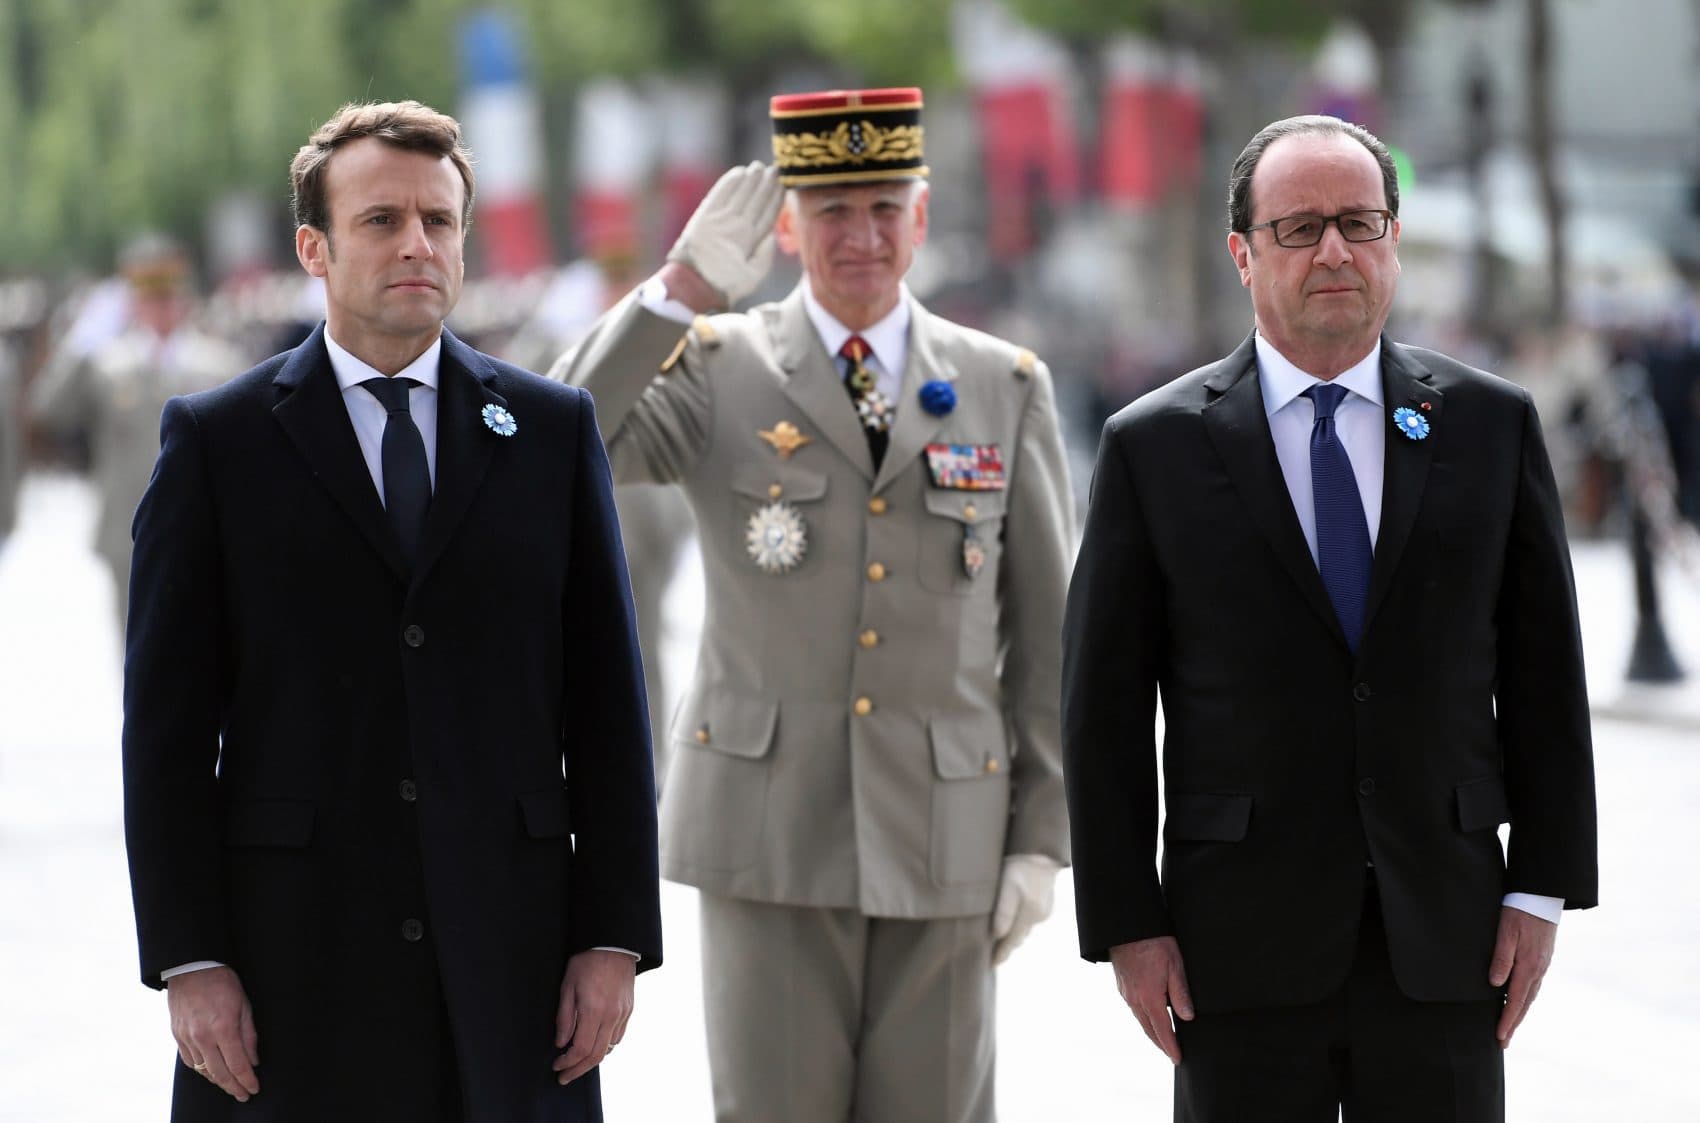 Can the new president bring change to a country where intolerance is very much alive? asks Régine Michelle Jean-Charles. French President-elect Emmanuel Macron, left, an current President Francois Hollande, right, attend a ceremony to mark the end of World War II at the Arc de Triomphe in Paris, Monday, May 8, 2017. Macron defeated far-right leader Marine Le Pen handily in Sunday's presidential vote, and now must pull together a majority for his year-old political movement by mid-June legislative elections. (Stepahne de Sakutin, Pool via AP)